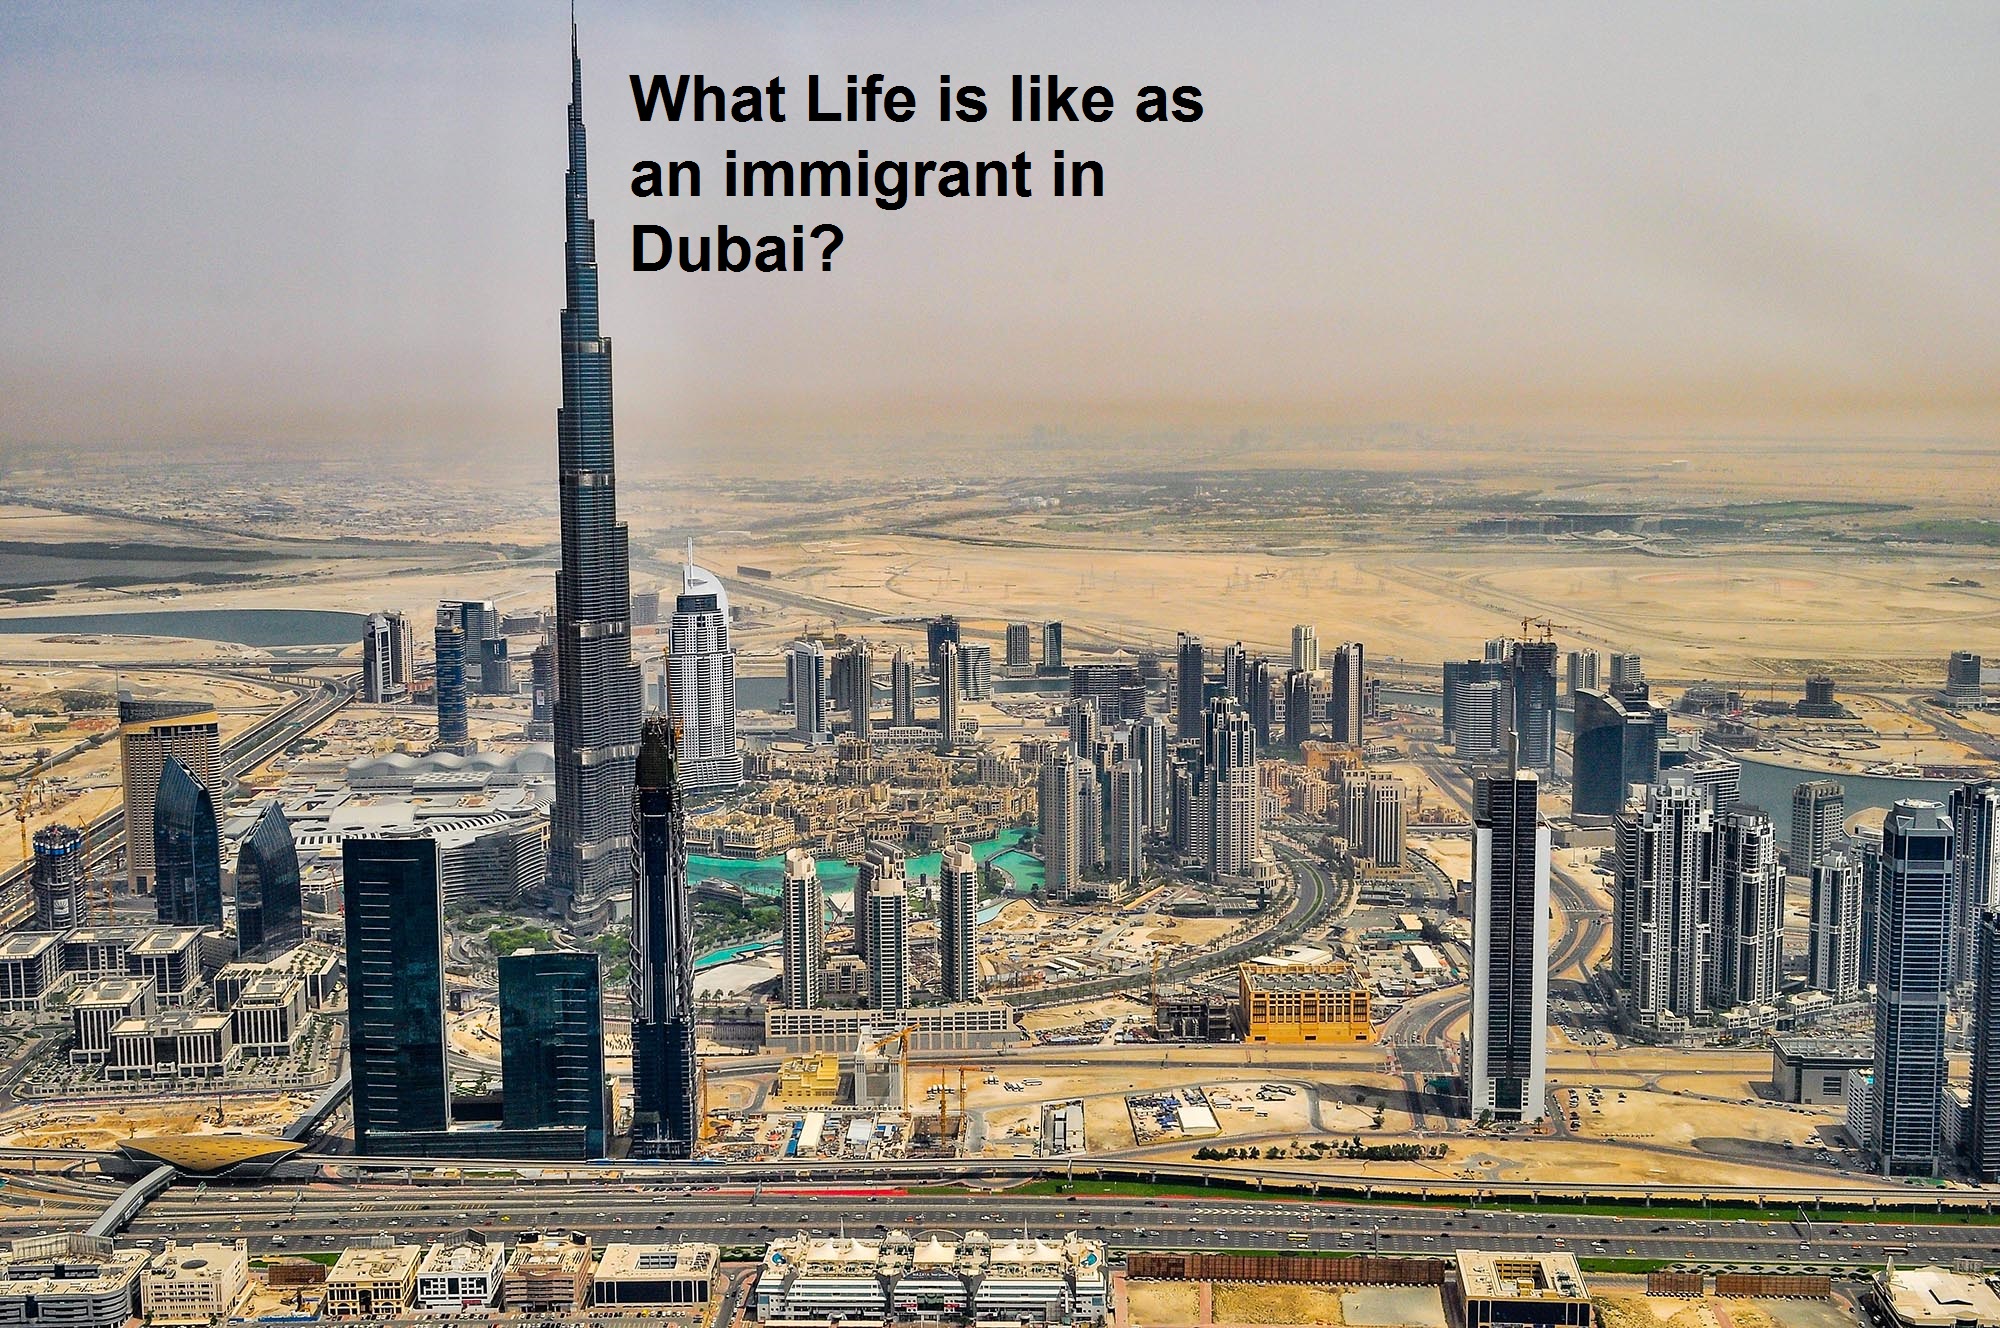 What Life is like as an immigrant in Dubai?